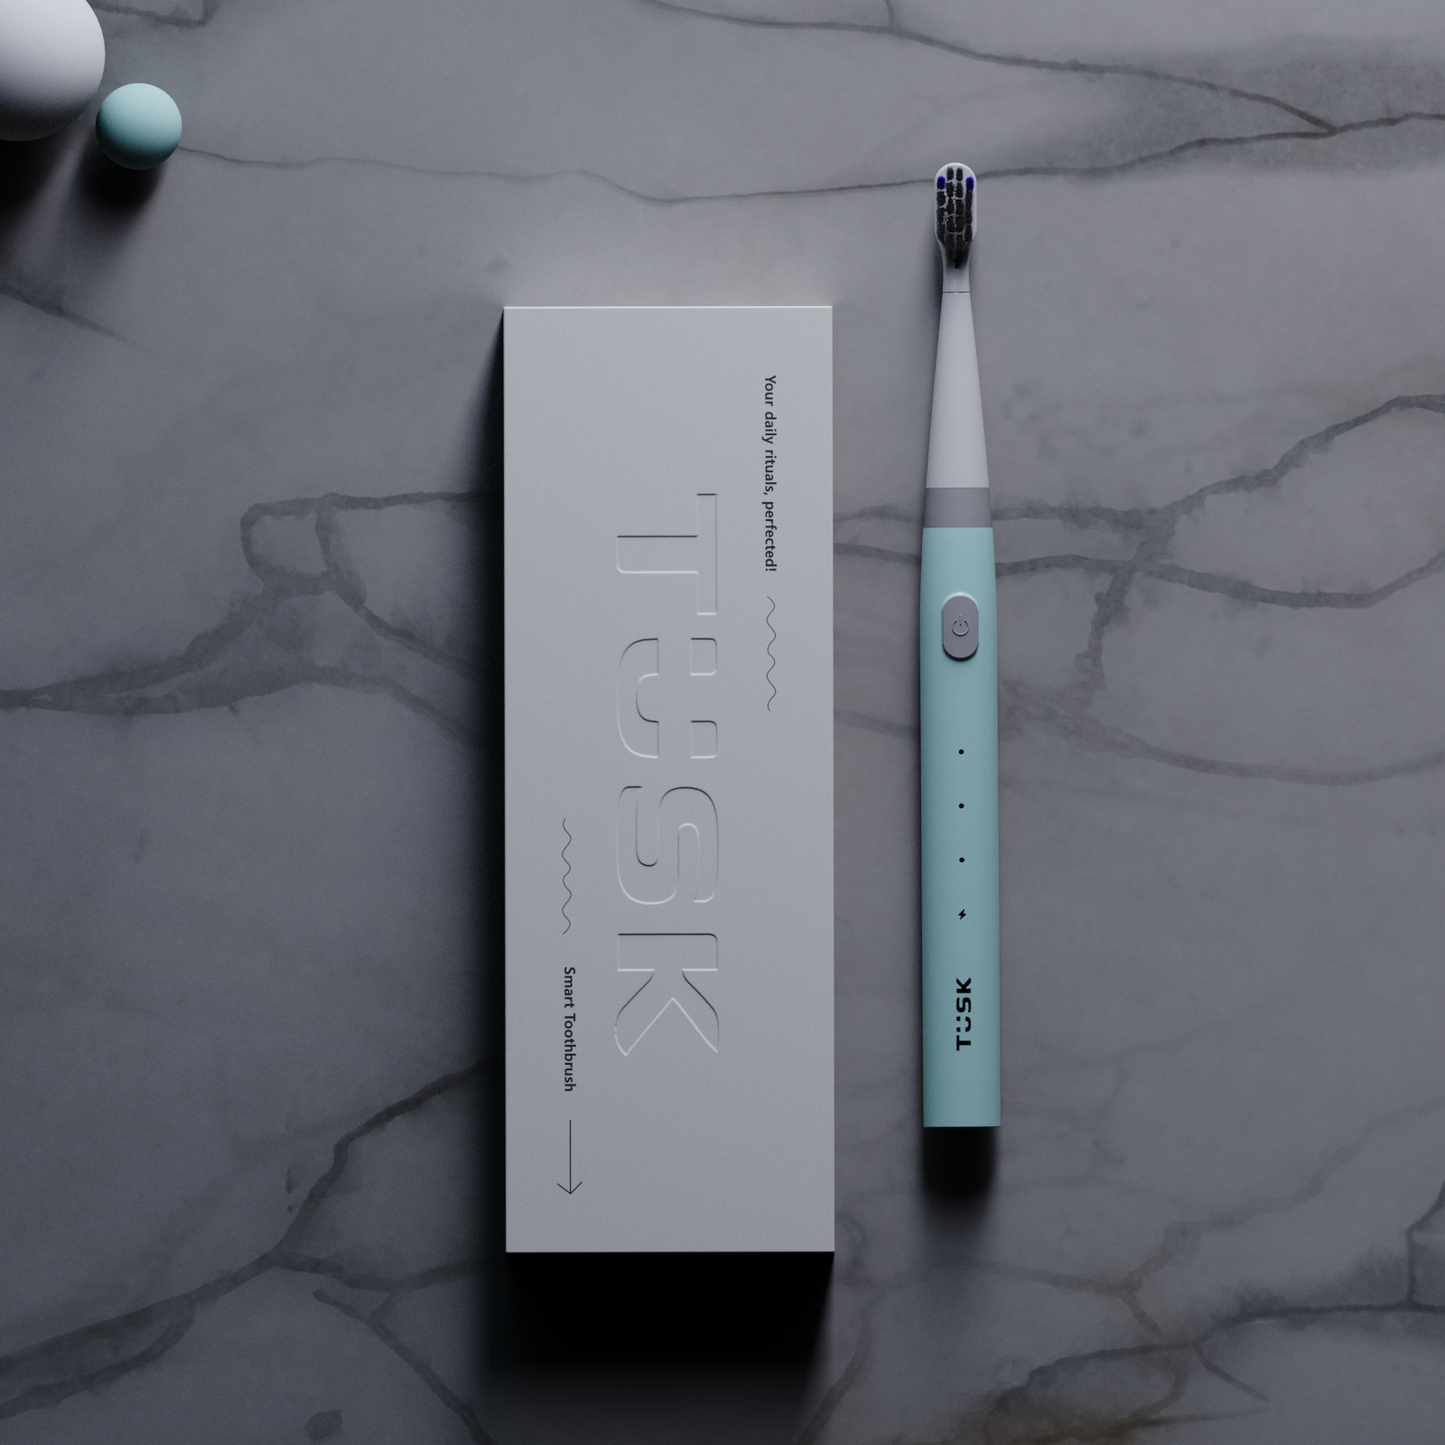 Smart Electric Toothbrush